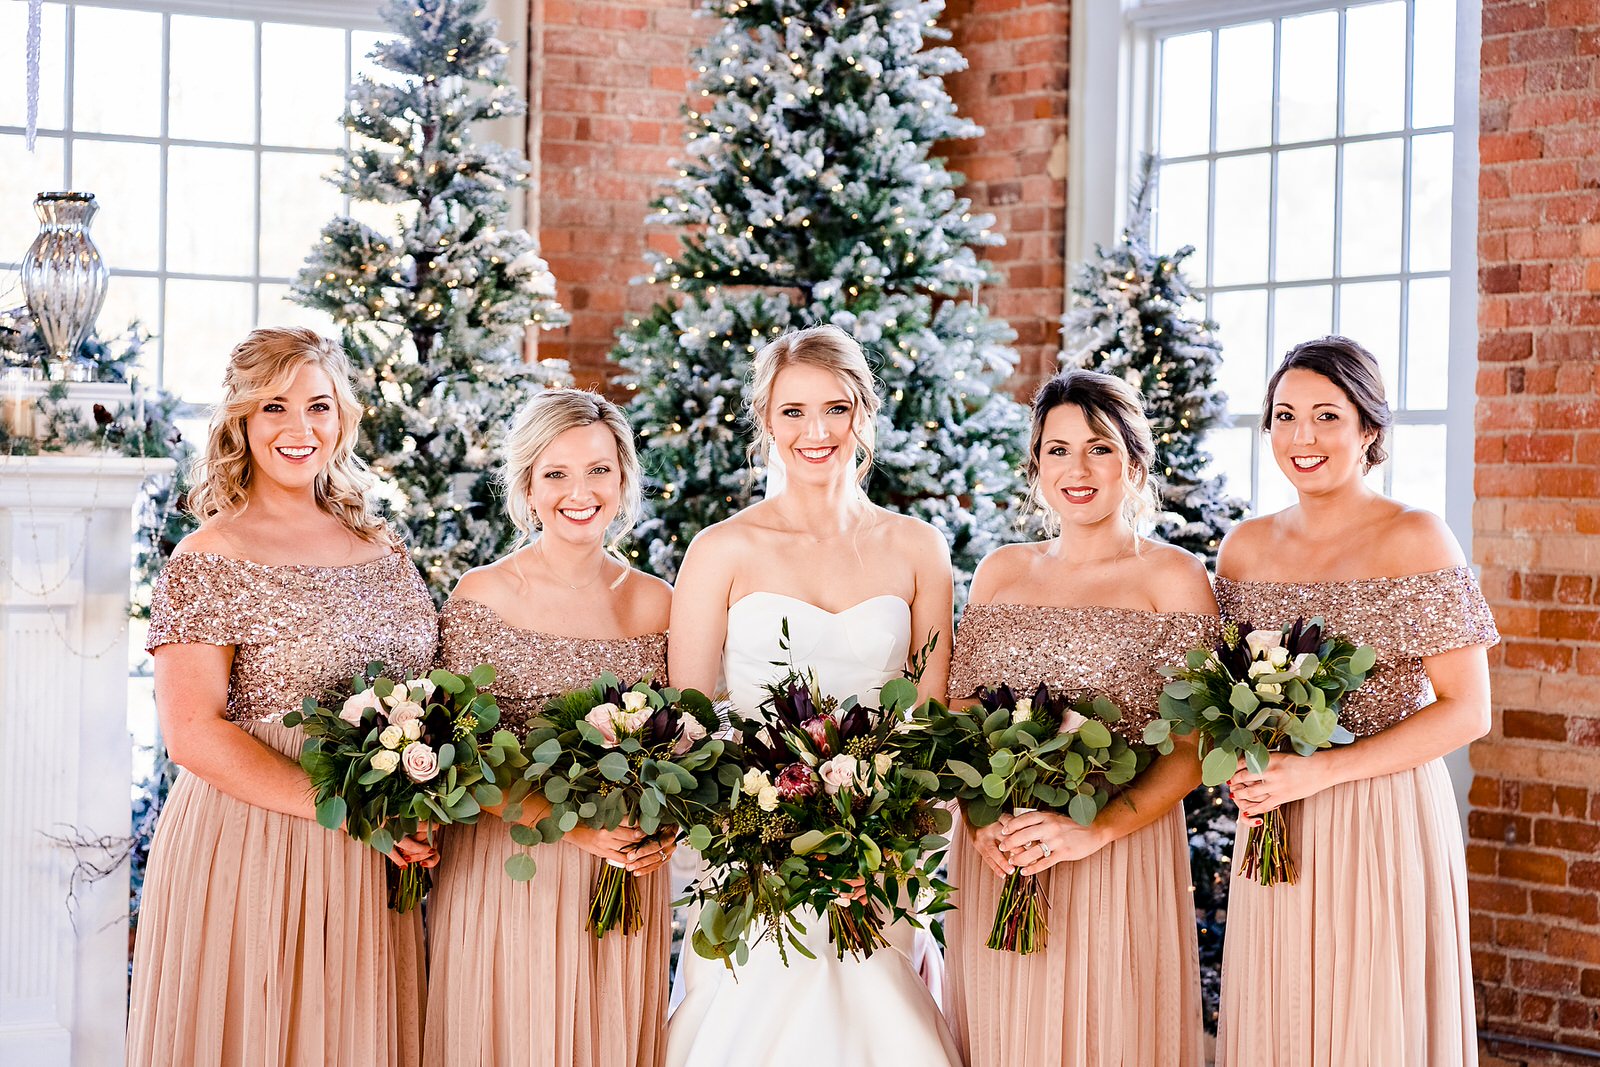 Winter wedding inspiration, sparkly gold bridesmaid dresses and black tuxedos